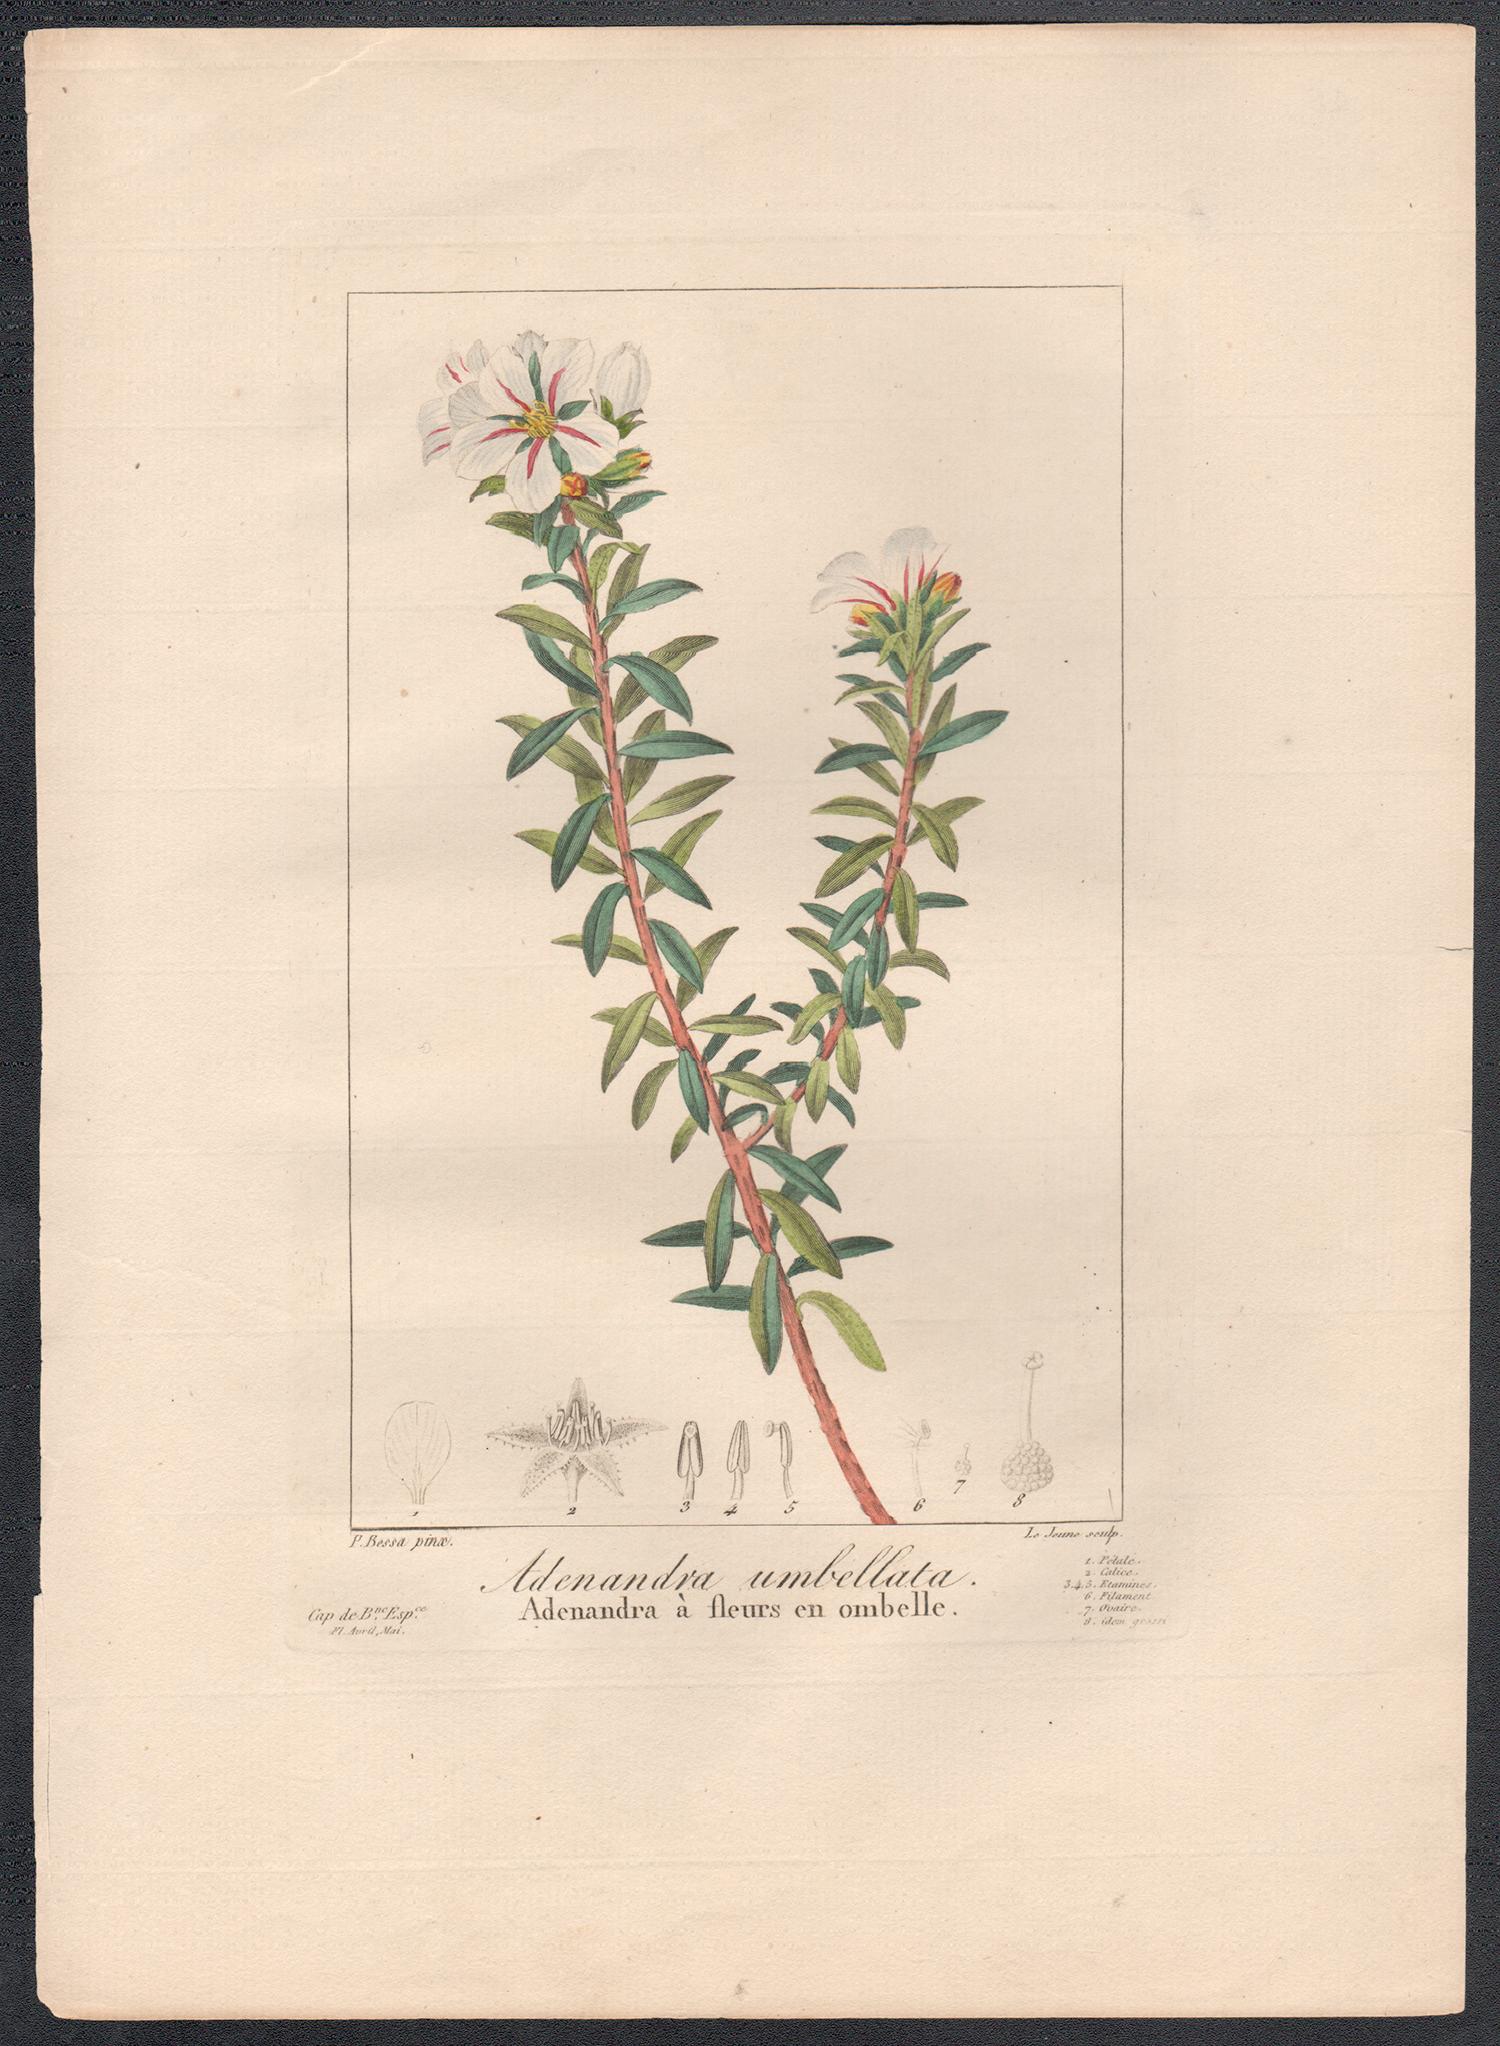 Adenandra umbellata - French botanical flower engraving by Bessa, c1830 - Print by After Pancrace Bessa